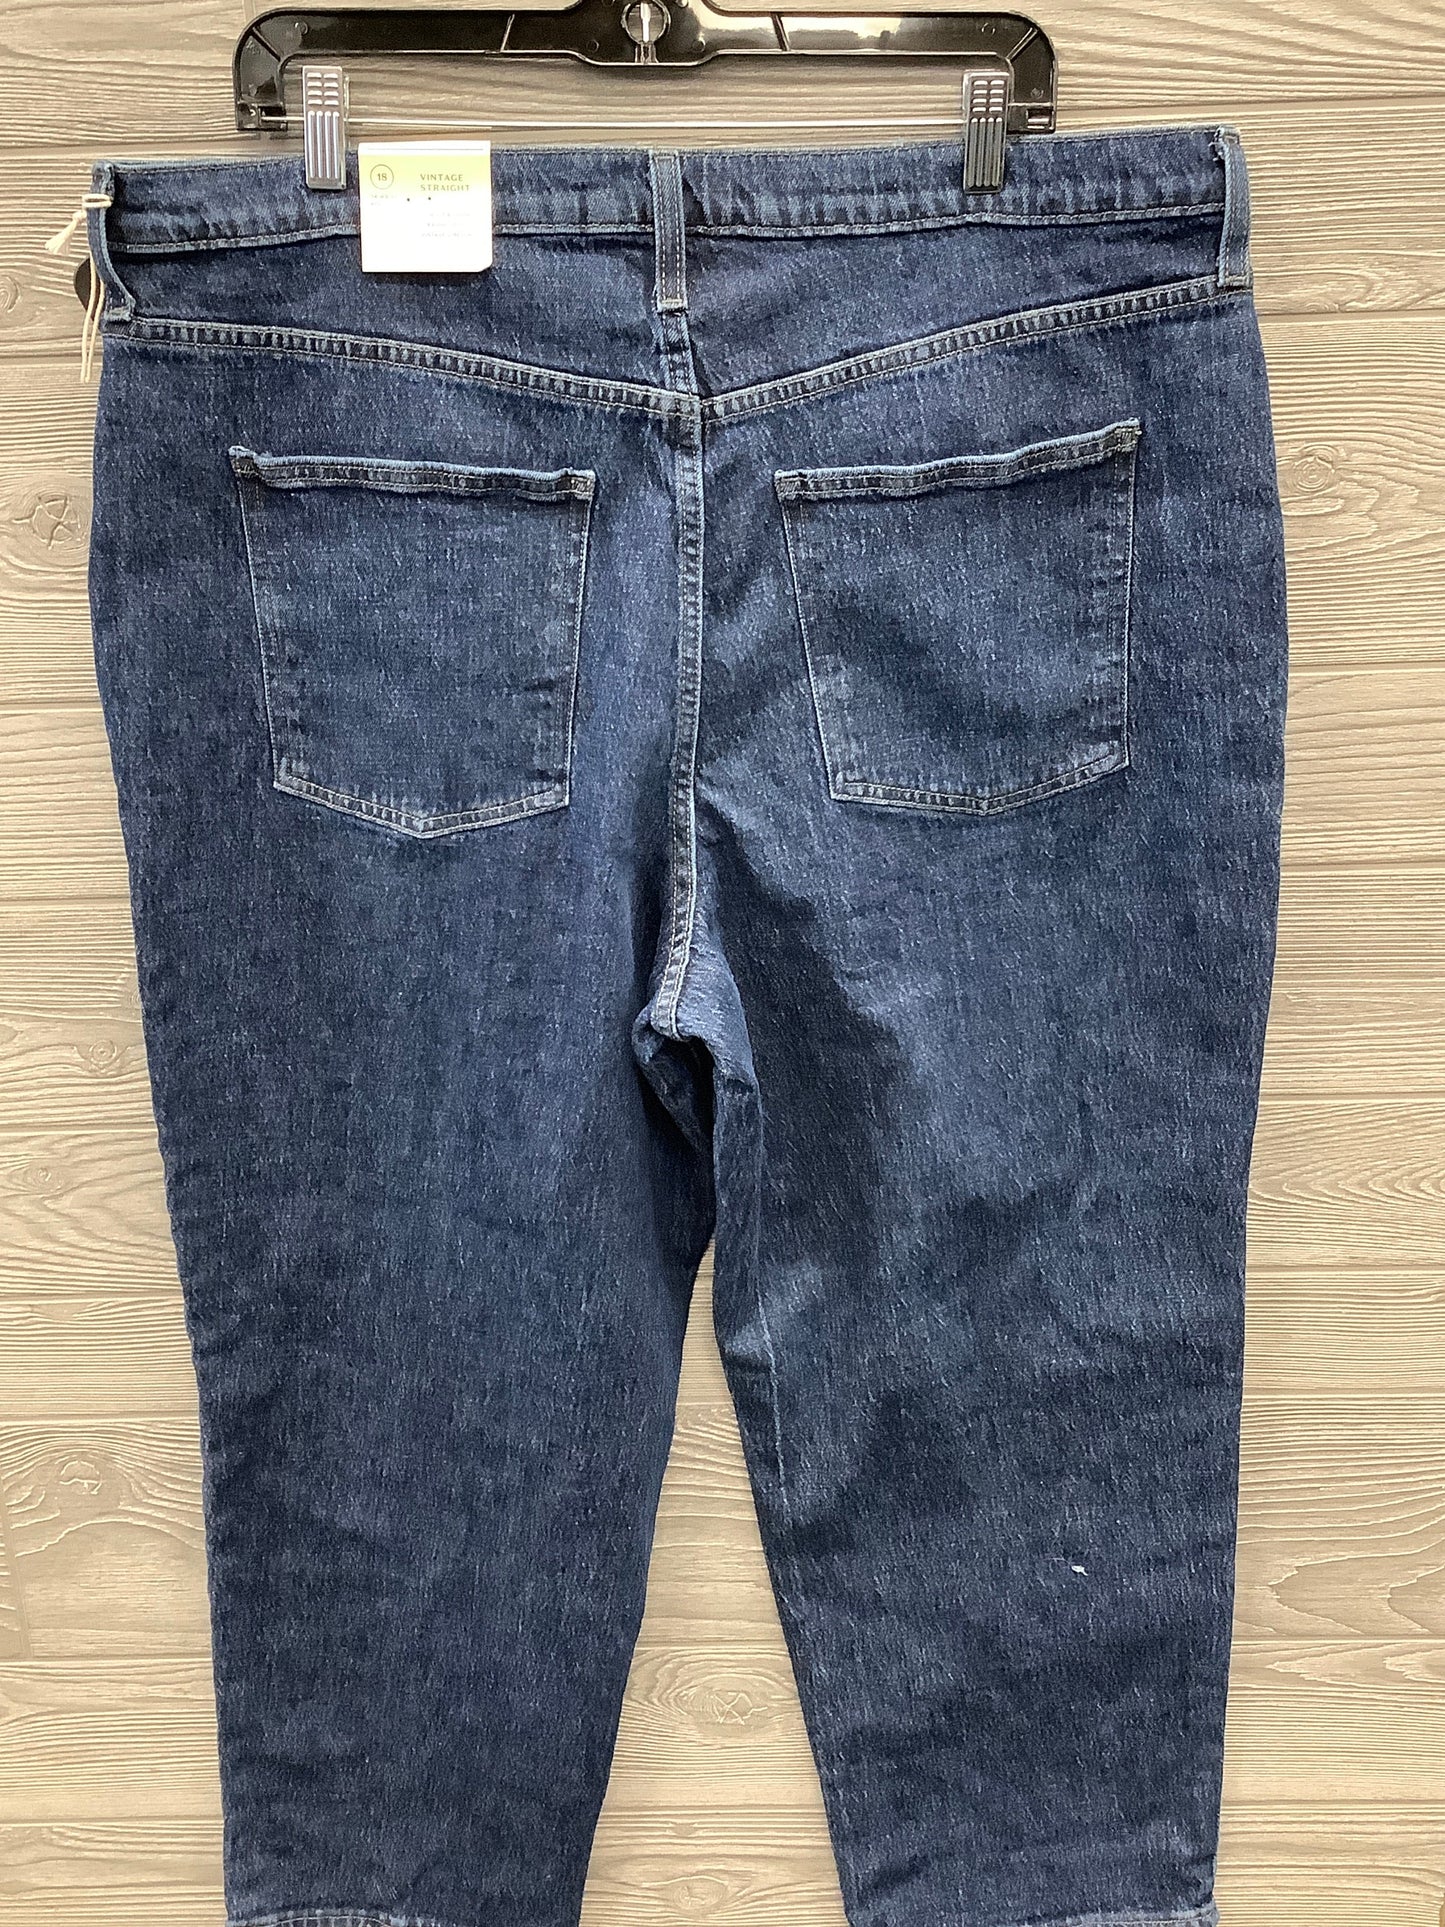 Jeans Straight By Universal Thread  Size: 18